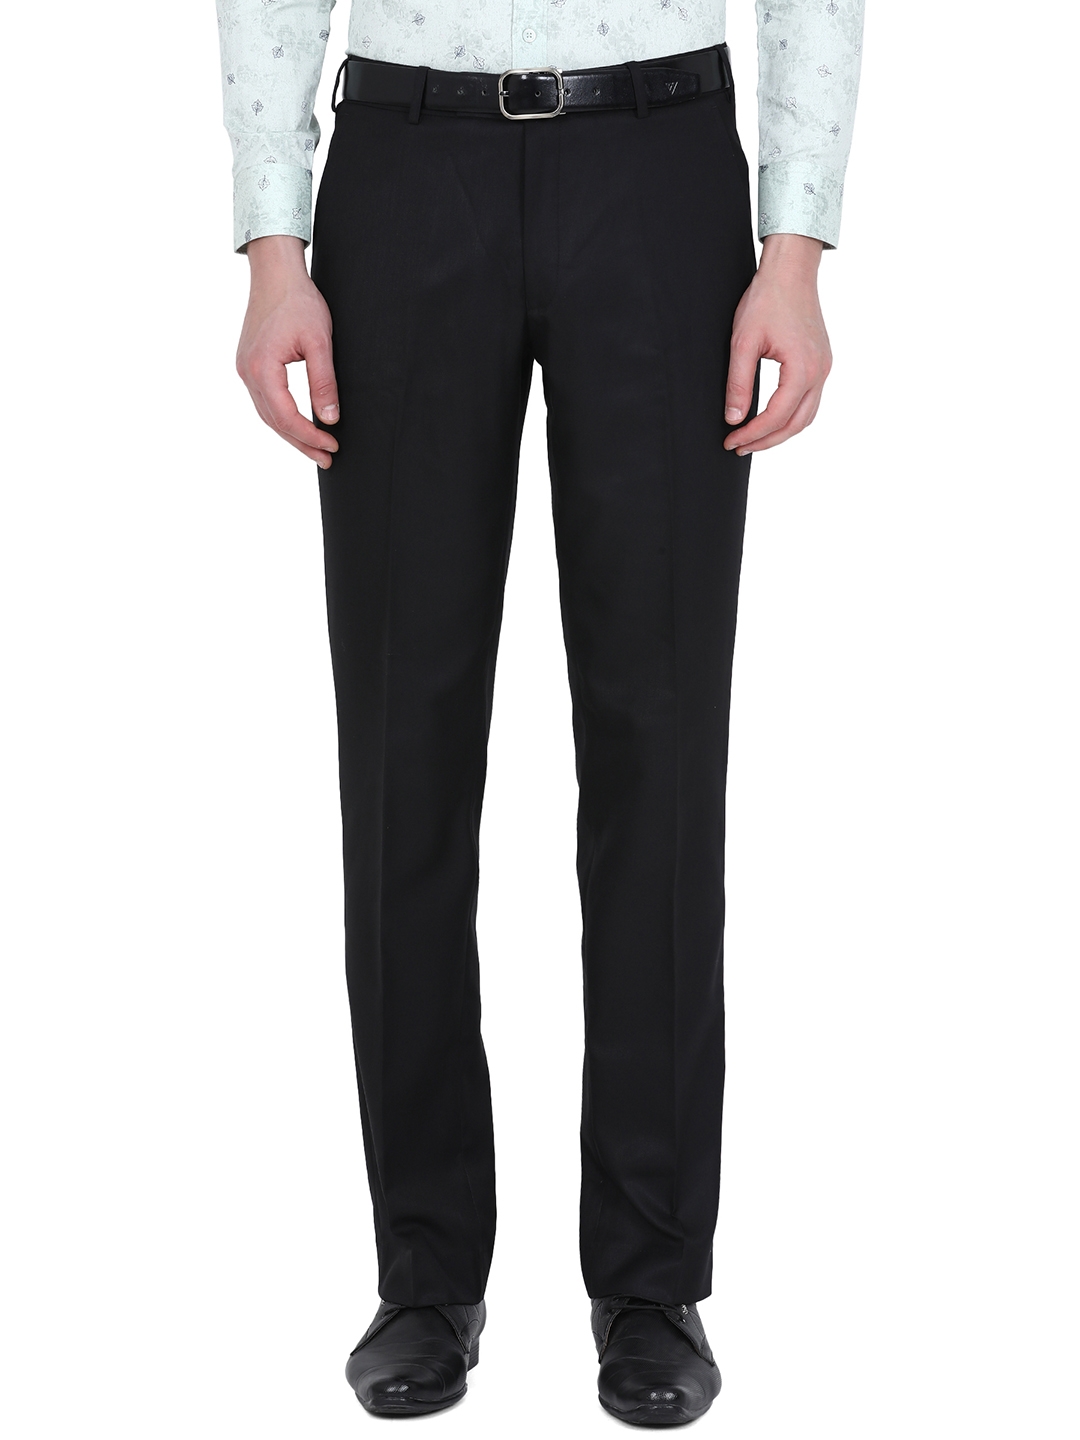 Greenfibre | Black Solid Classic fit Formal Trouser | Greenfibre 0